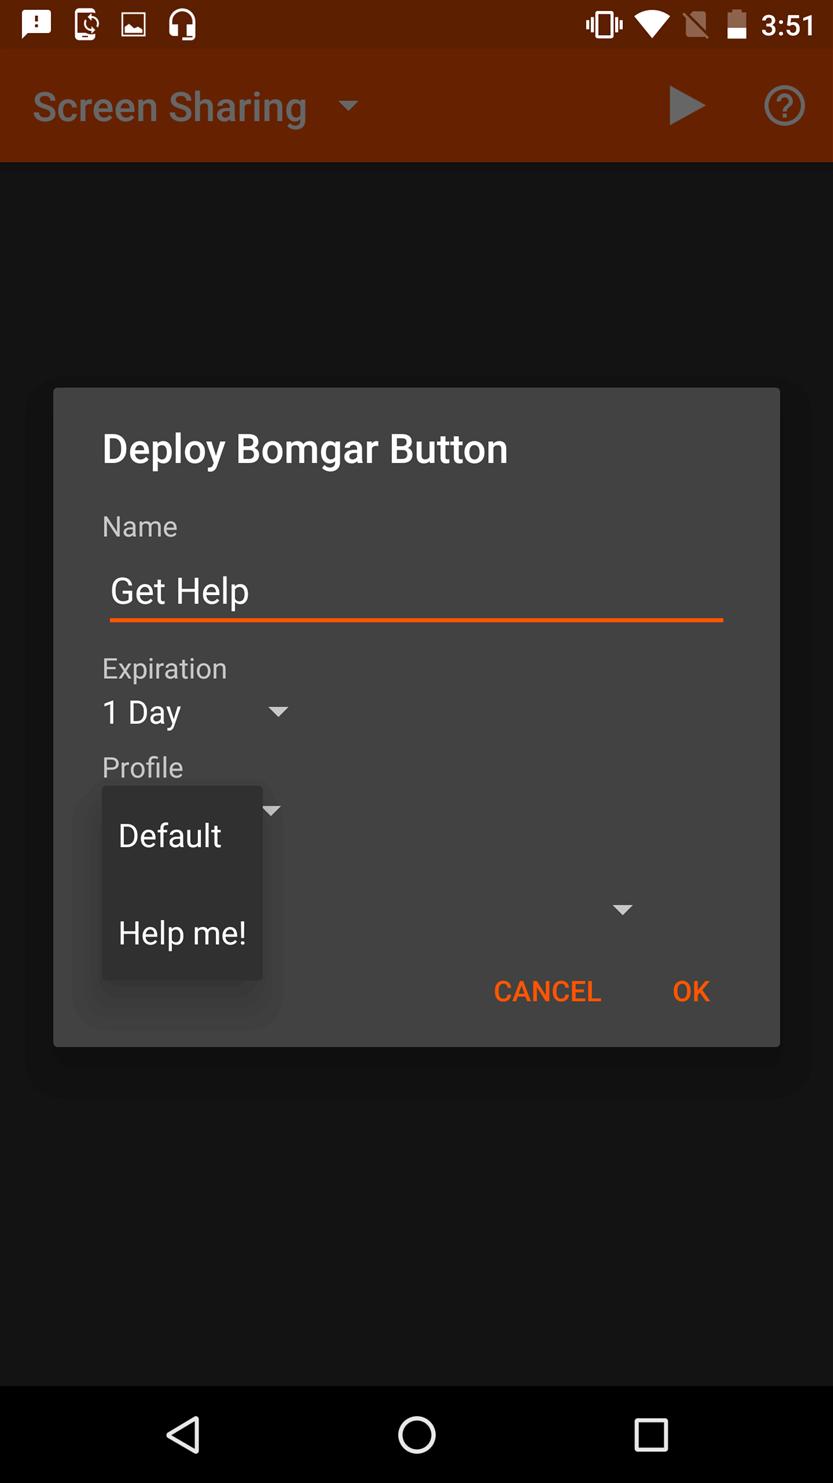 Touch the Profile entry to open a list of Bomgar Button profiles from which you can select.